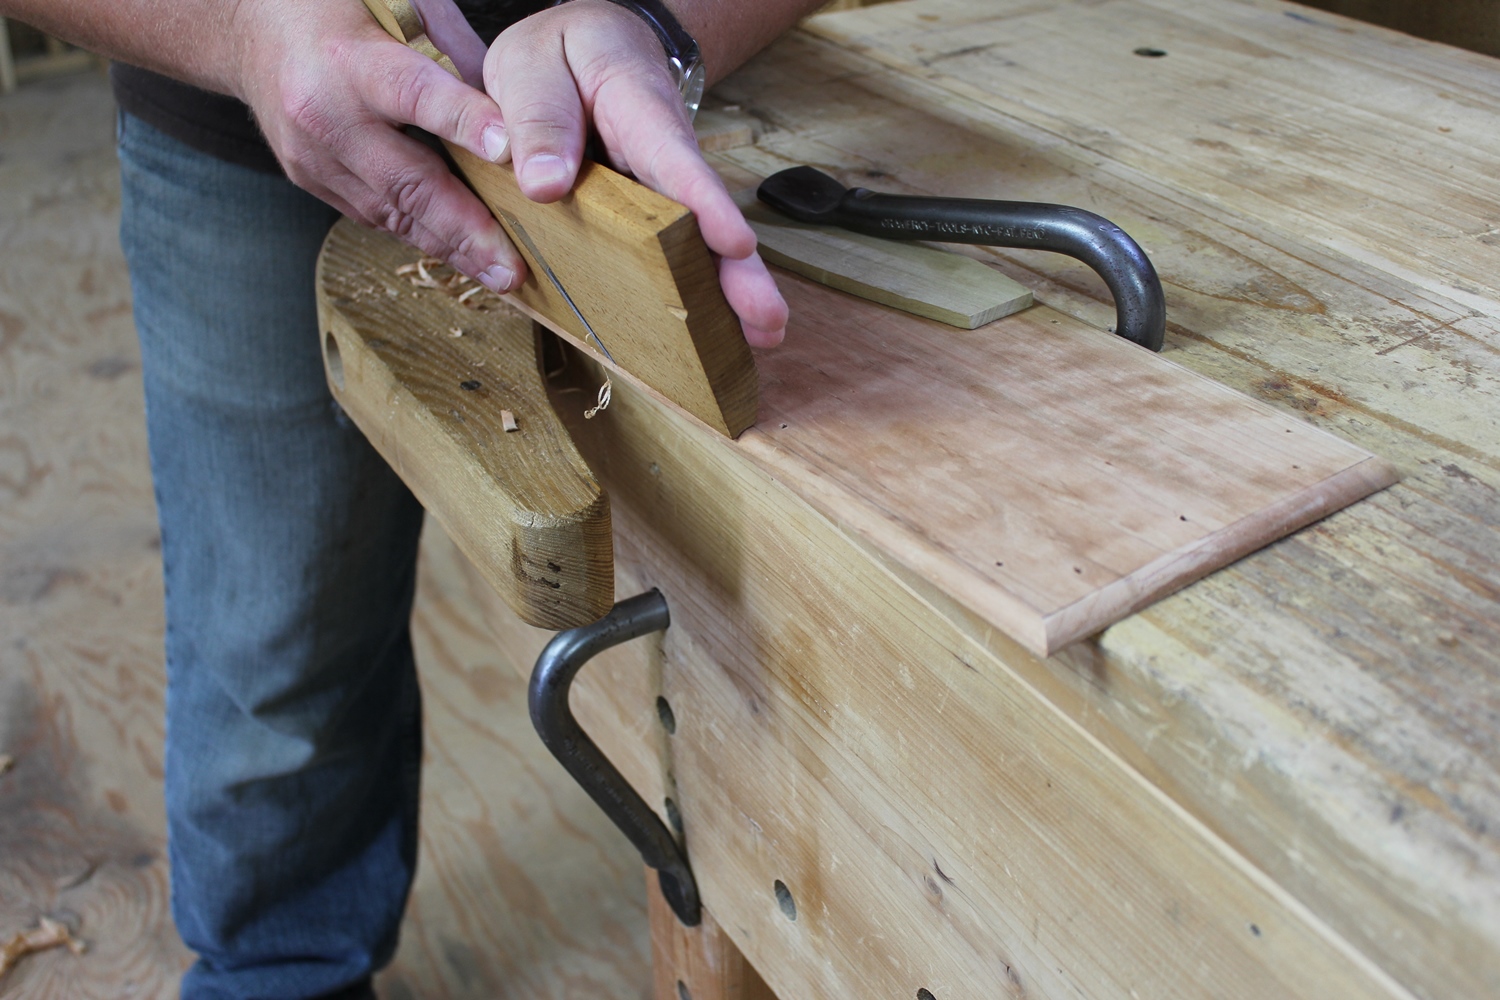 Planing with the hollow molding plane